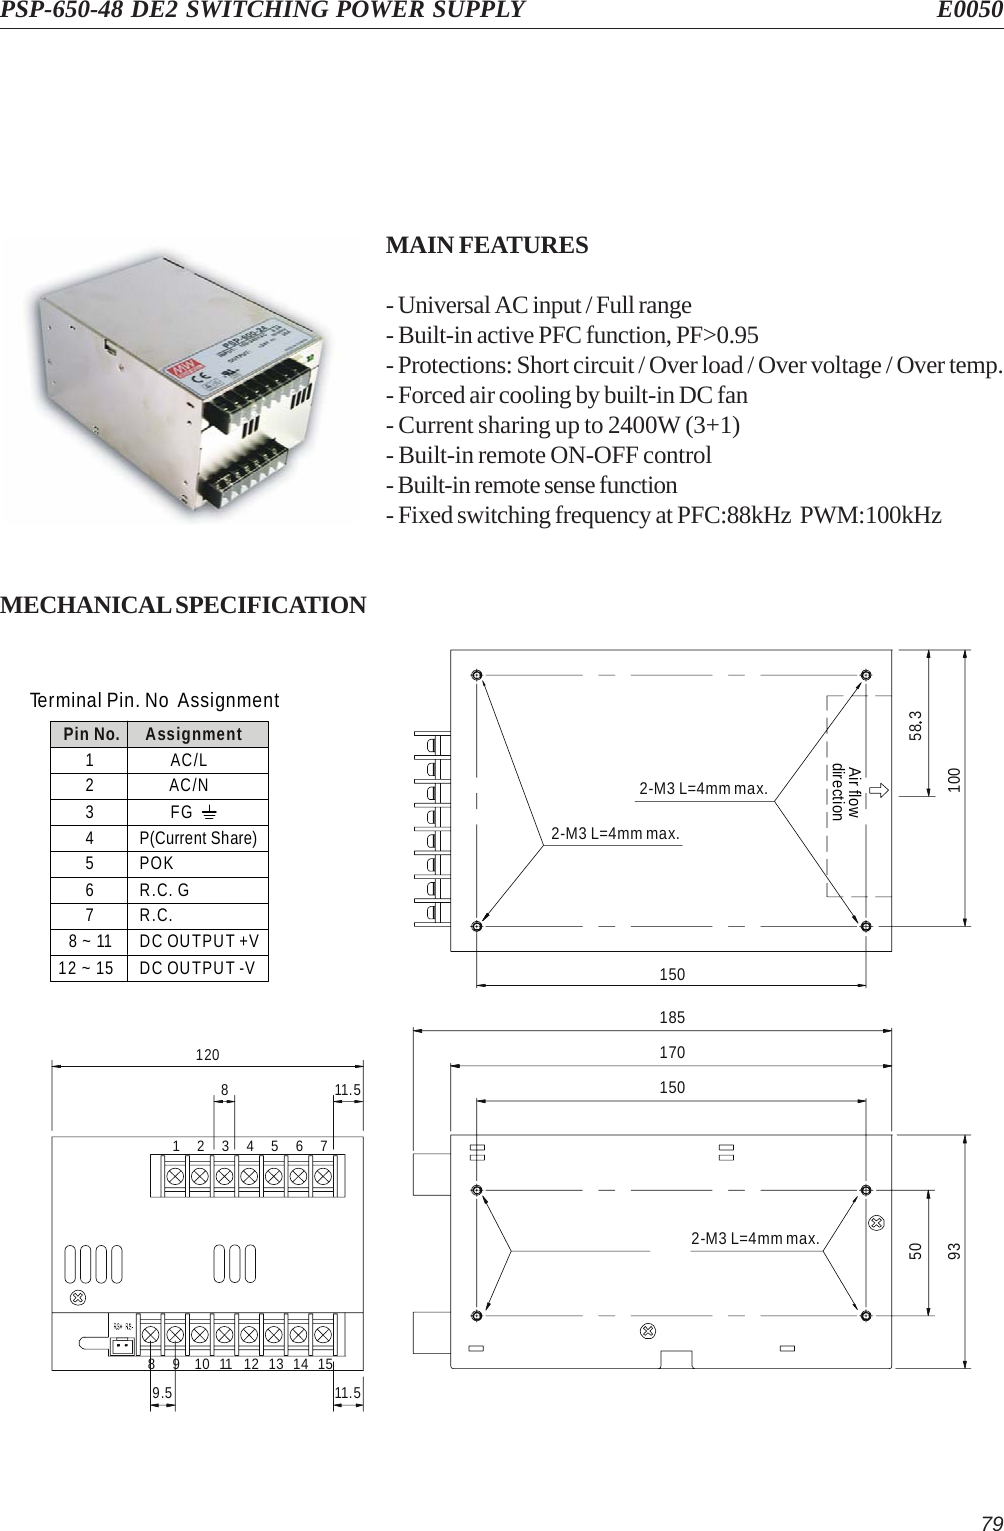 79PSP-650-48 DE2 SWITCHING POWER SUPPLY E0050MAIN FEATURES- Universal AC input / Full range- Built-in active PFC function, PF&gt;0.95- Protections: Short circuit / Over load / Over voltage / Over temp.- Forced air cooling by built-in DC fan- Current sharing up to 2400W (3+1)- Built-in remote ON-OFF control- Built-in remote sense function- Fixed switching frequency at PFC:88kHz  PWM:100kHzMECHANICAL SPECIFICATIONTerminal Pin. No AssignmentPin No.1345678 ~ 1112 ~ 152AssignmentFGP(Current Share)POKR.C. GR.C.DC OUTPUT +VDC OUTPUT -VAC/NAC/L1701851502-M3 L=4mm max.935015010058 32-M3 L=4mm max.Air flowdirection2-M3 L=4mm max.9.5 11.5811.5120151413121110765432198